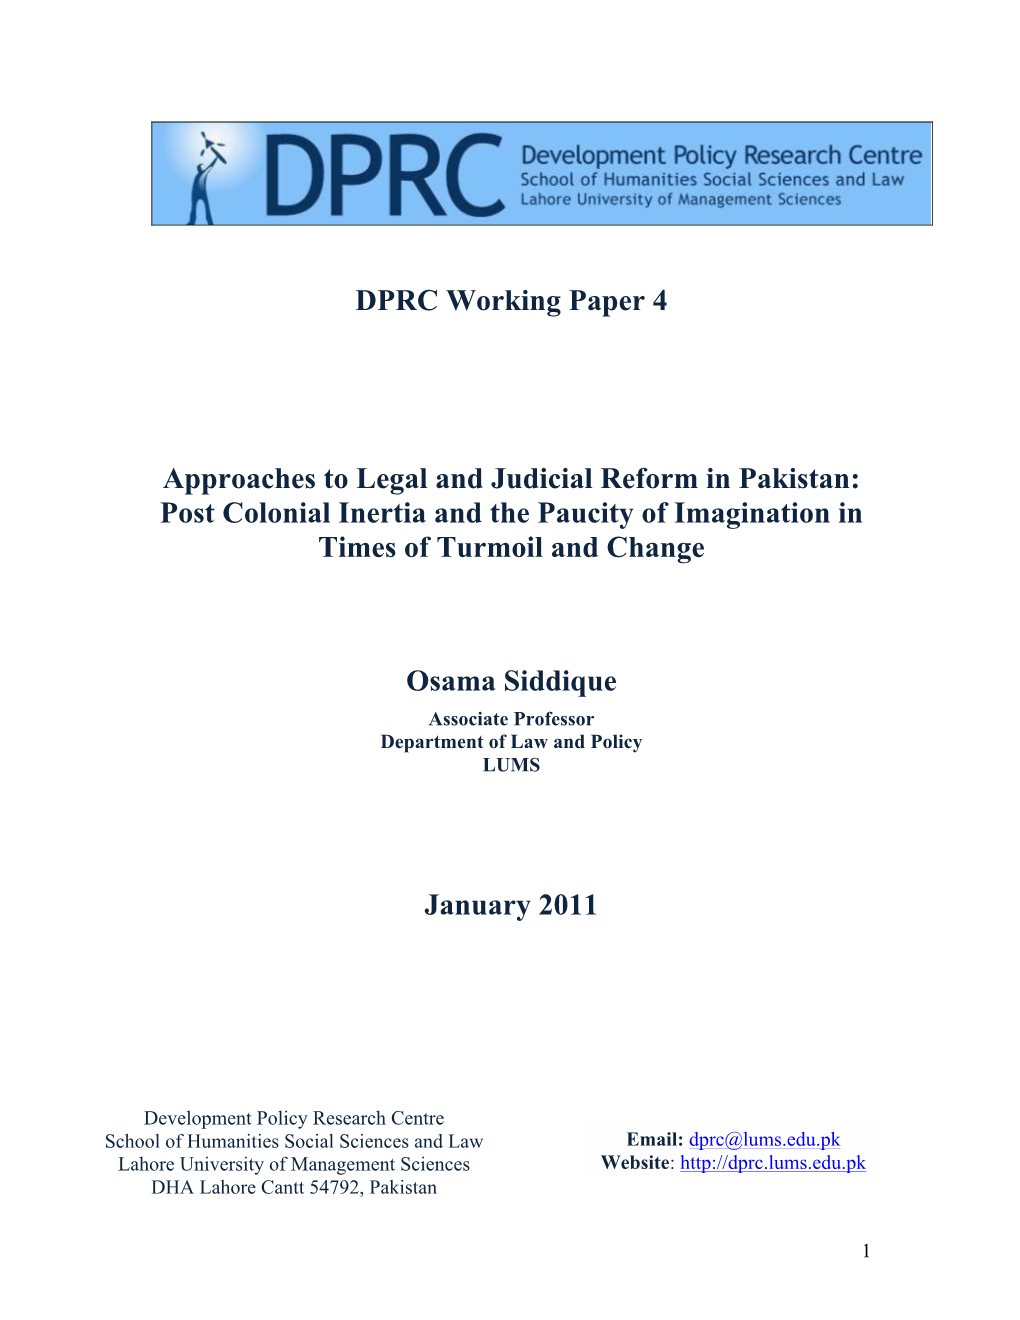 DPRC Working Paper 4 Approaches to Legal and Judicial Reform In